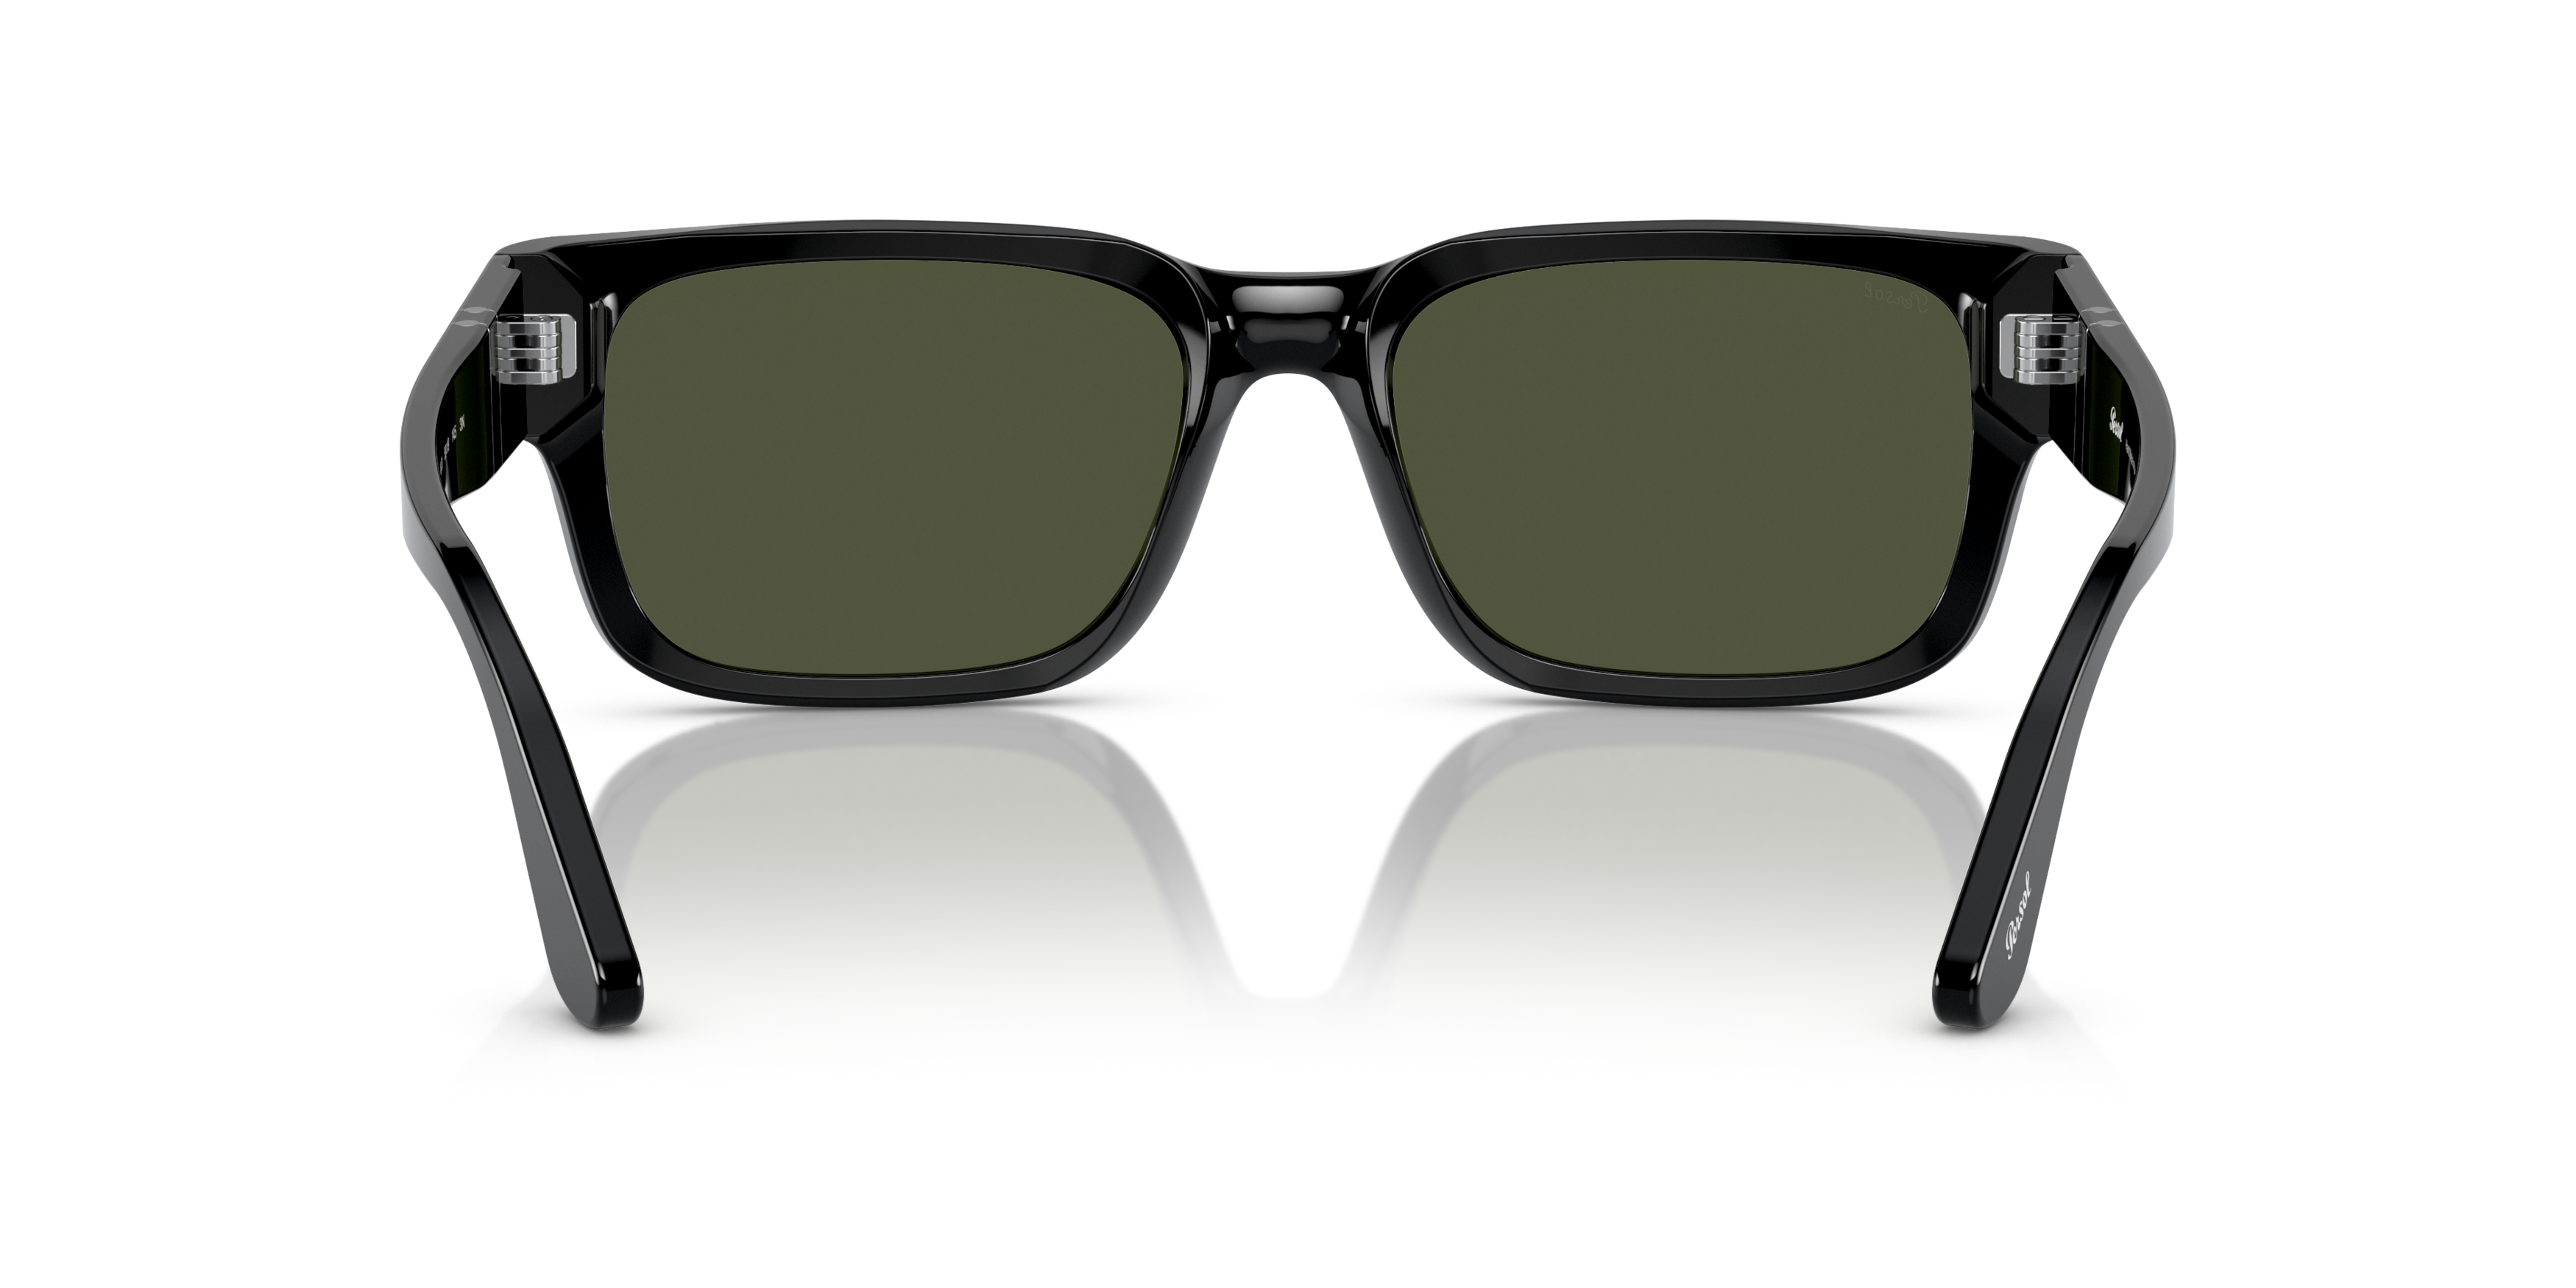 [products.image.detail02] Persol 0PO3315S 95/31 Solbriller